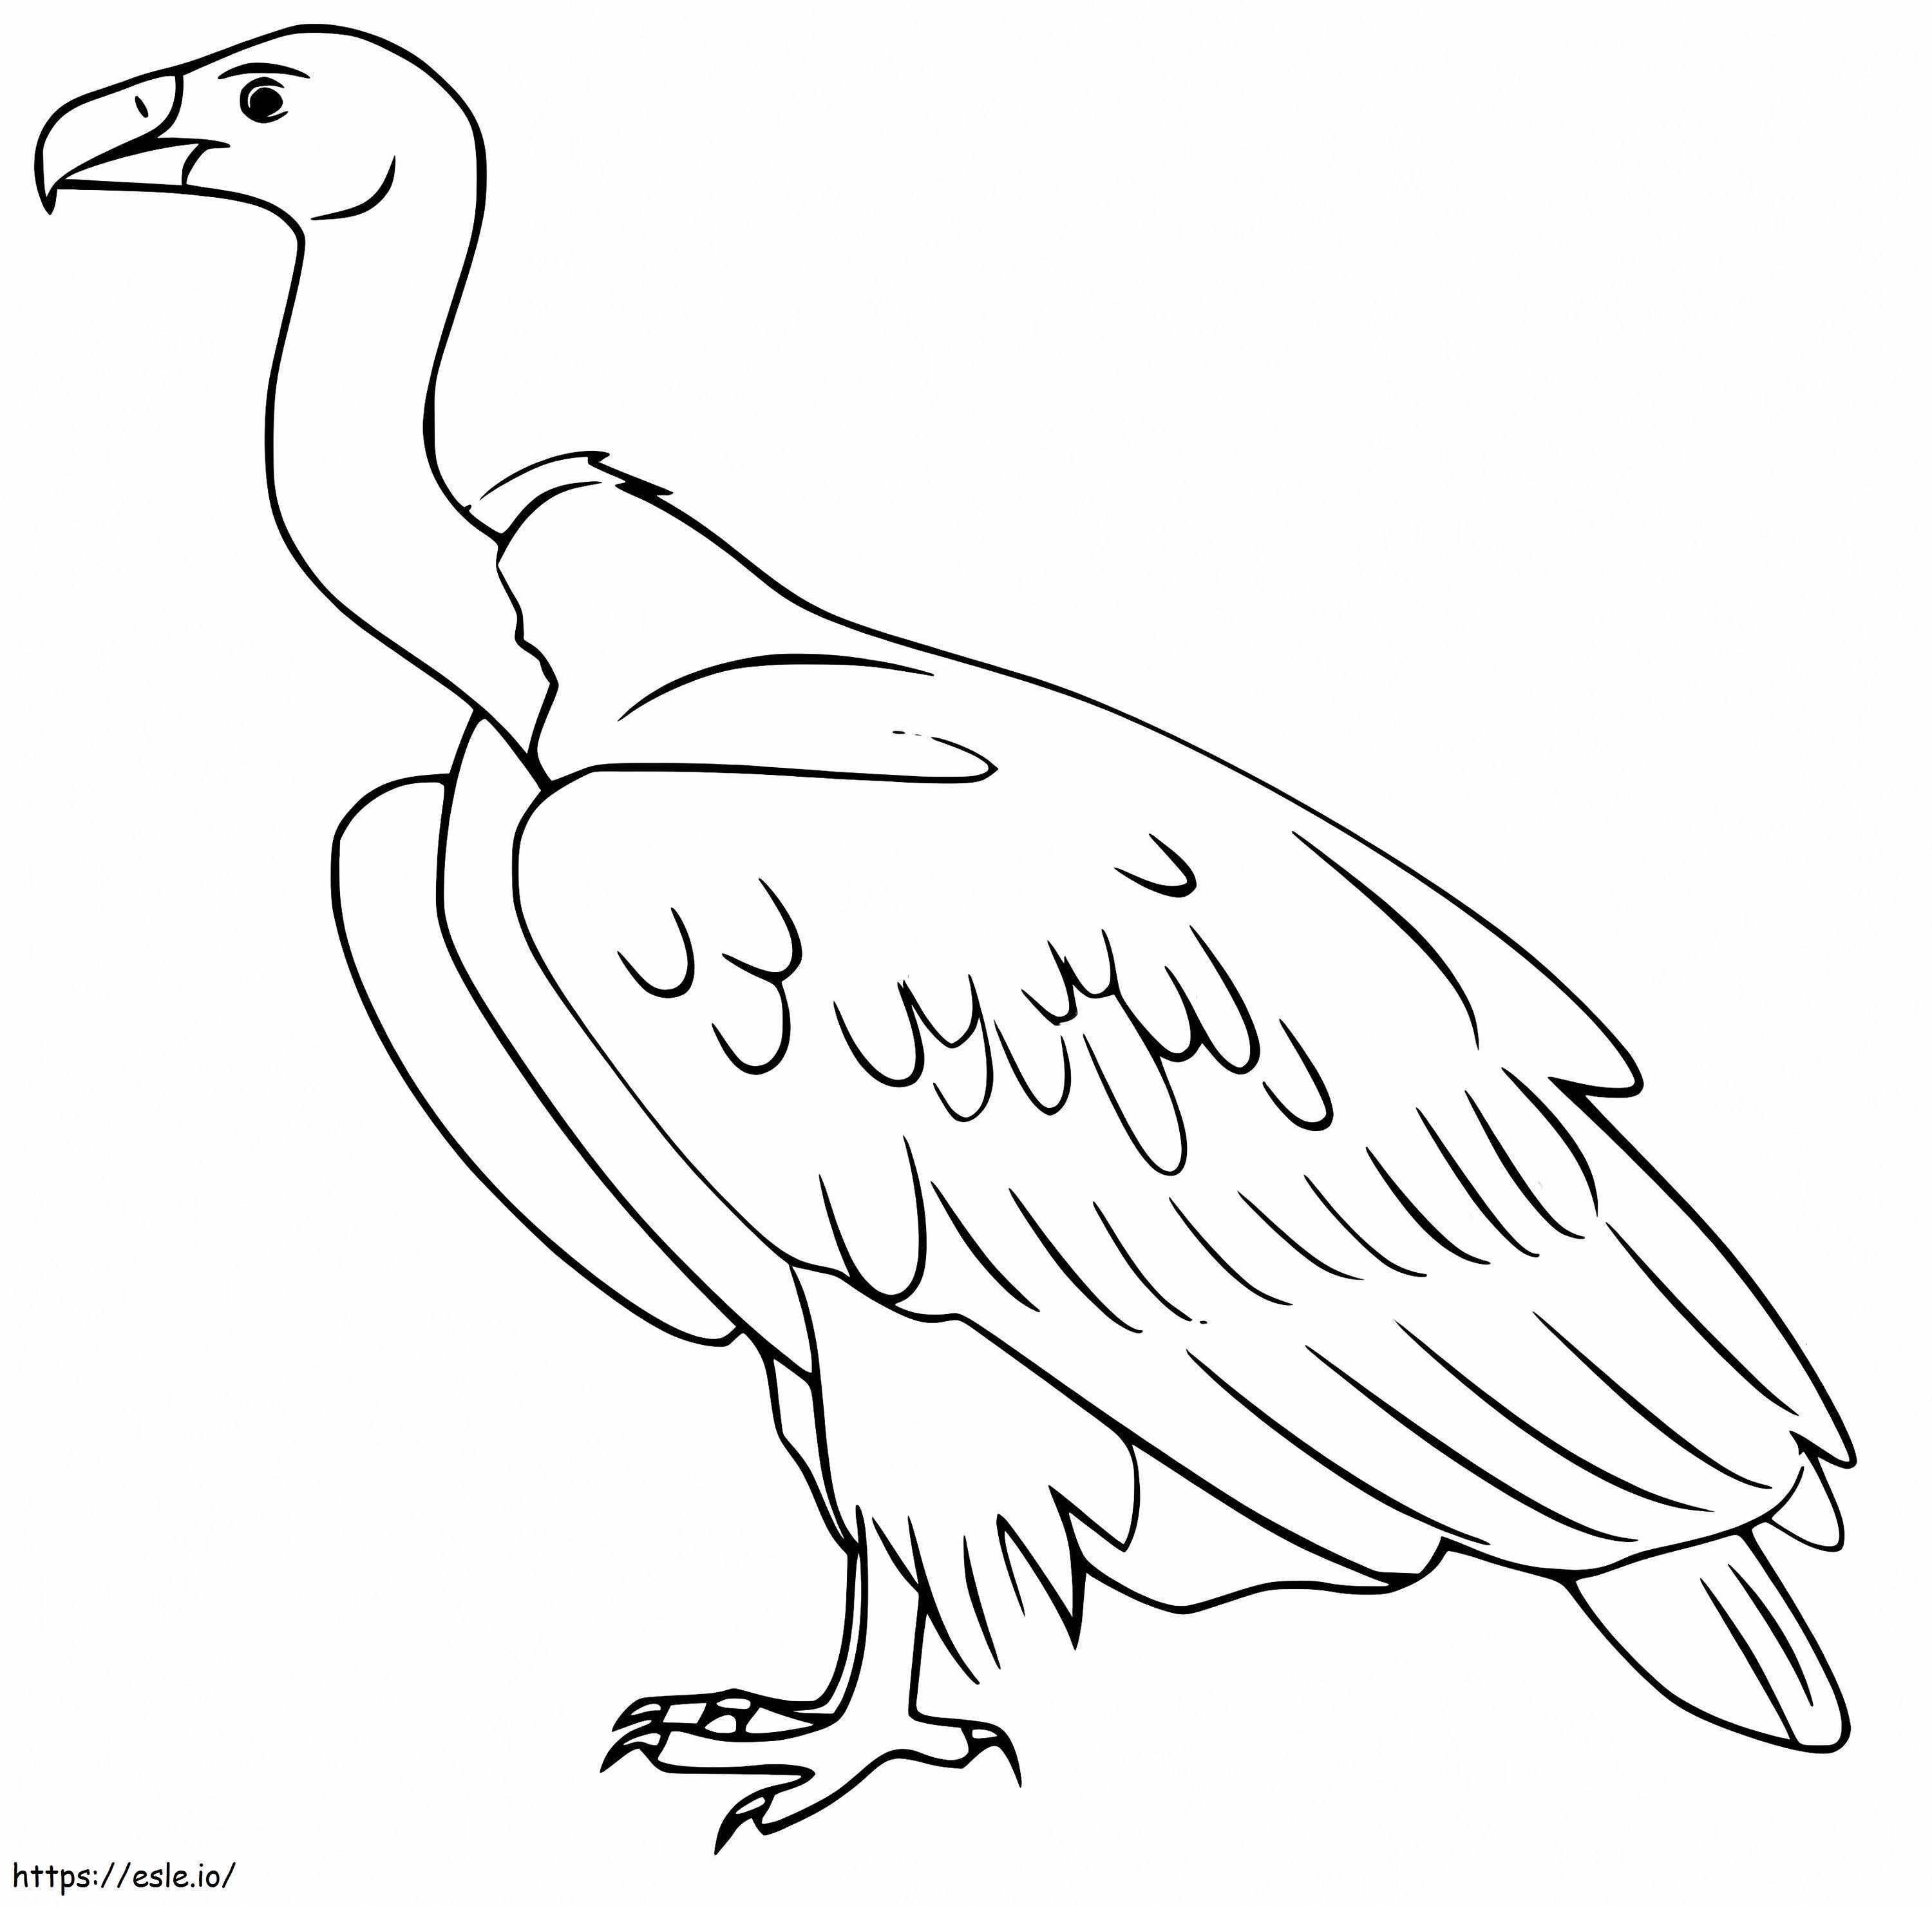 Normal Vulture coloring page